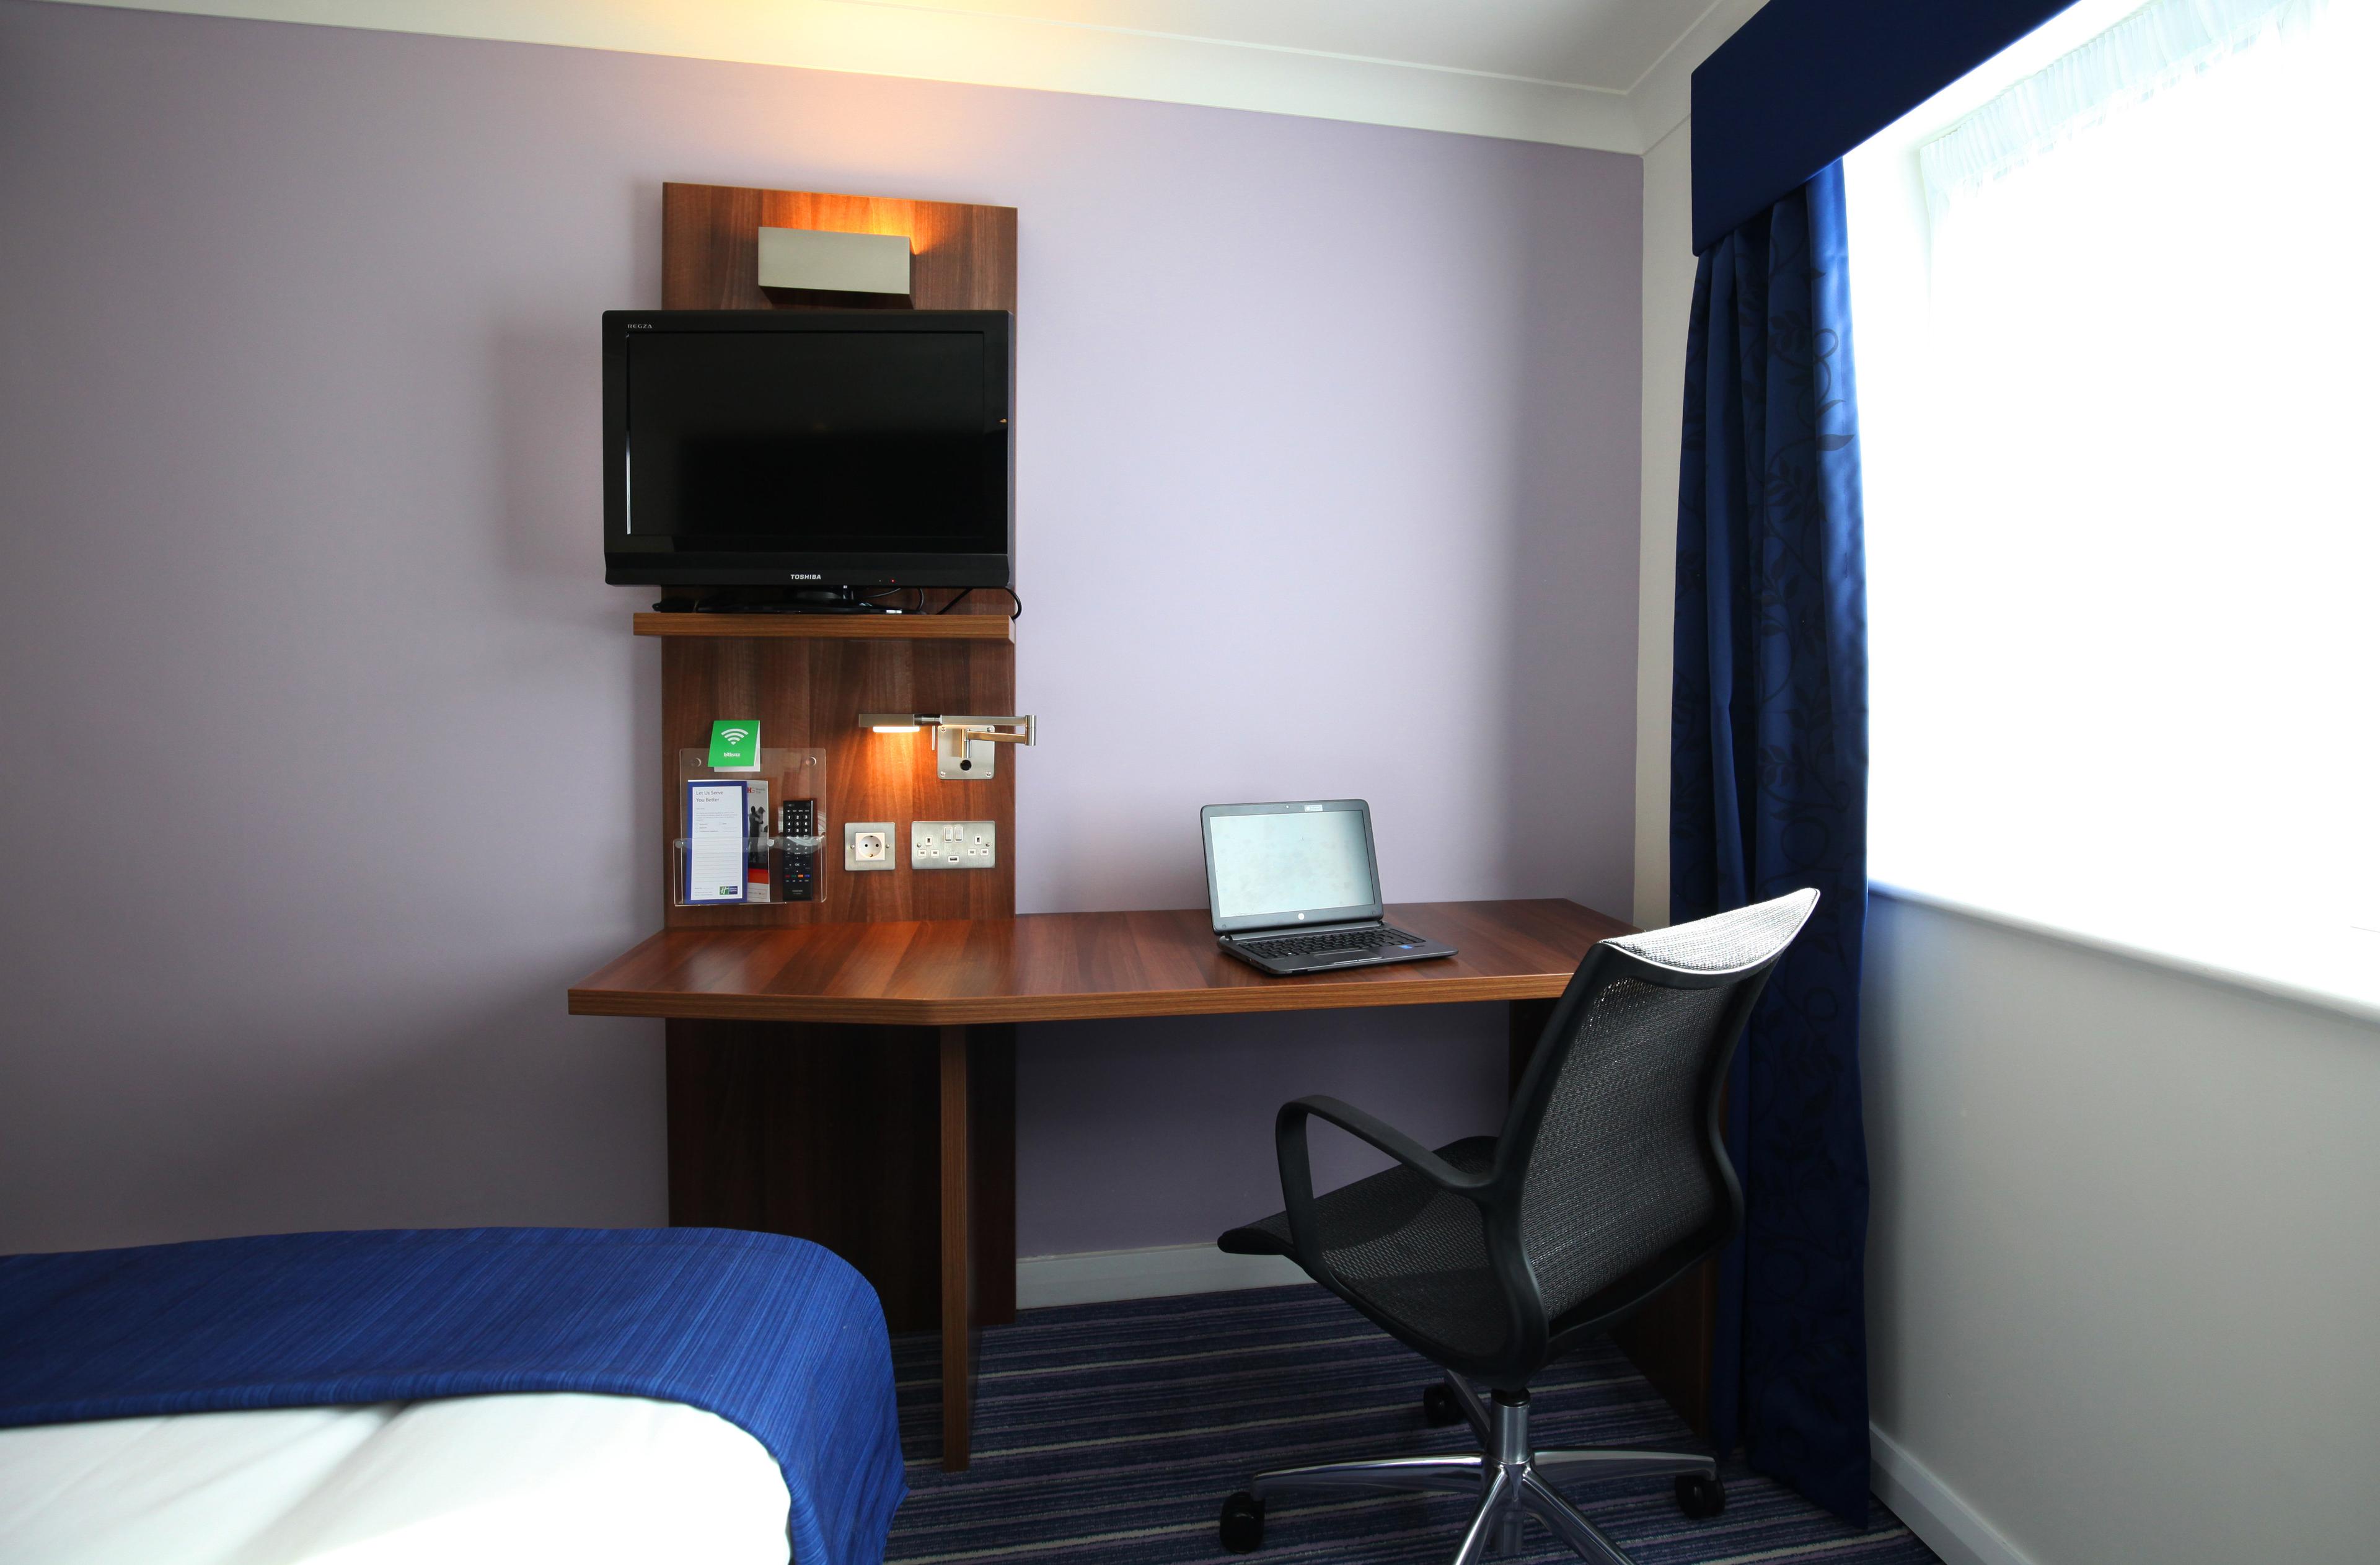 All our guest rooms include a well-lit desk area and free WiFi